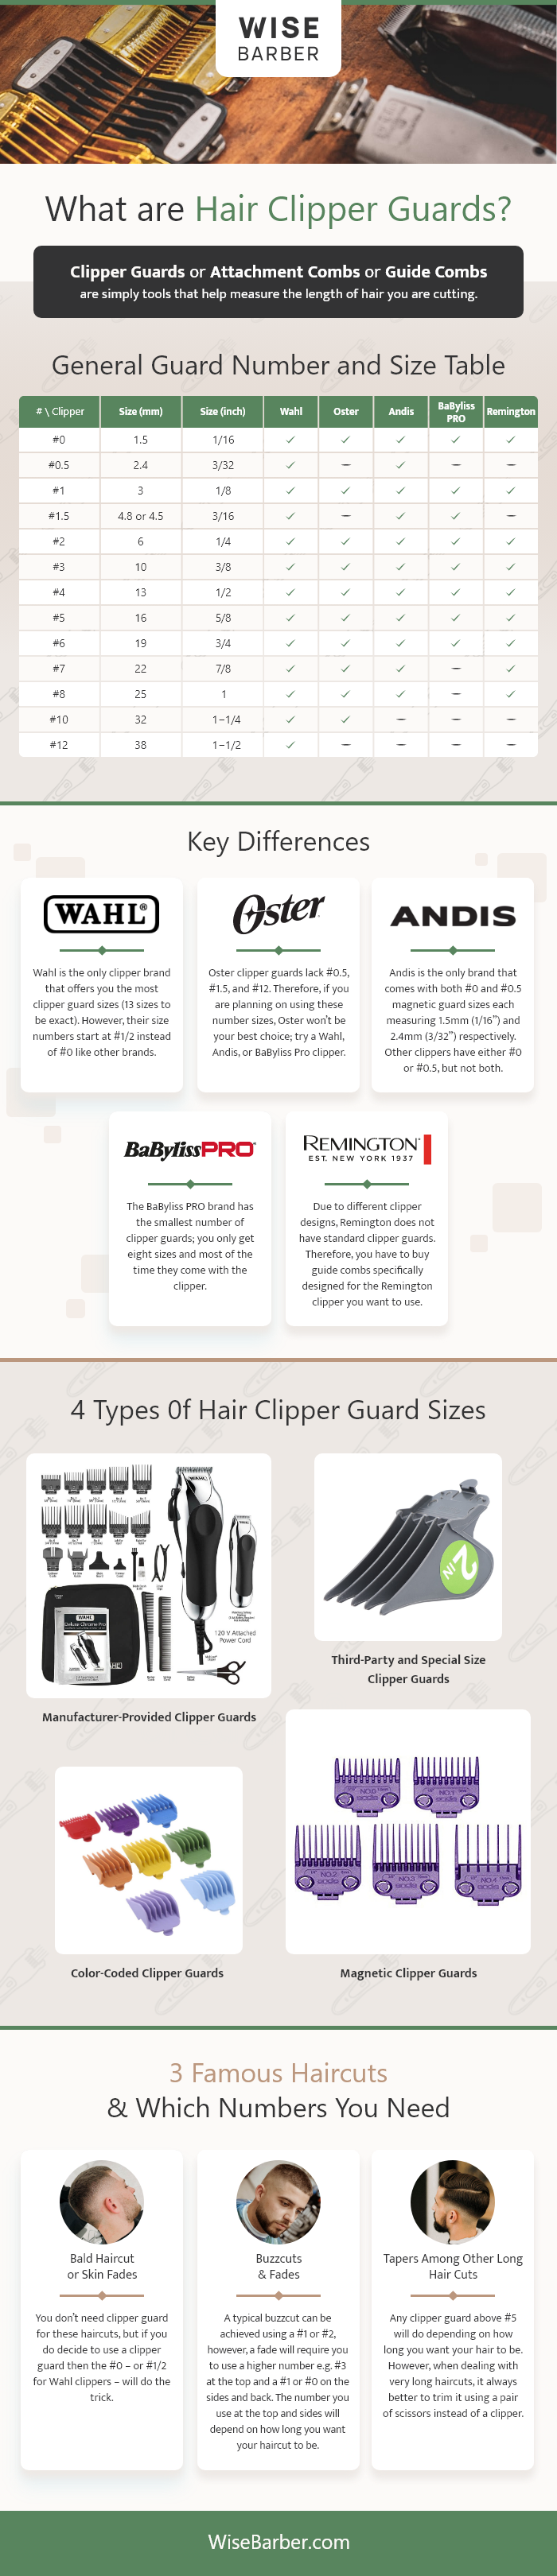 Hair Clipper Size Guards Infographic WiseBarber